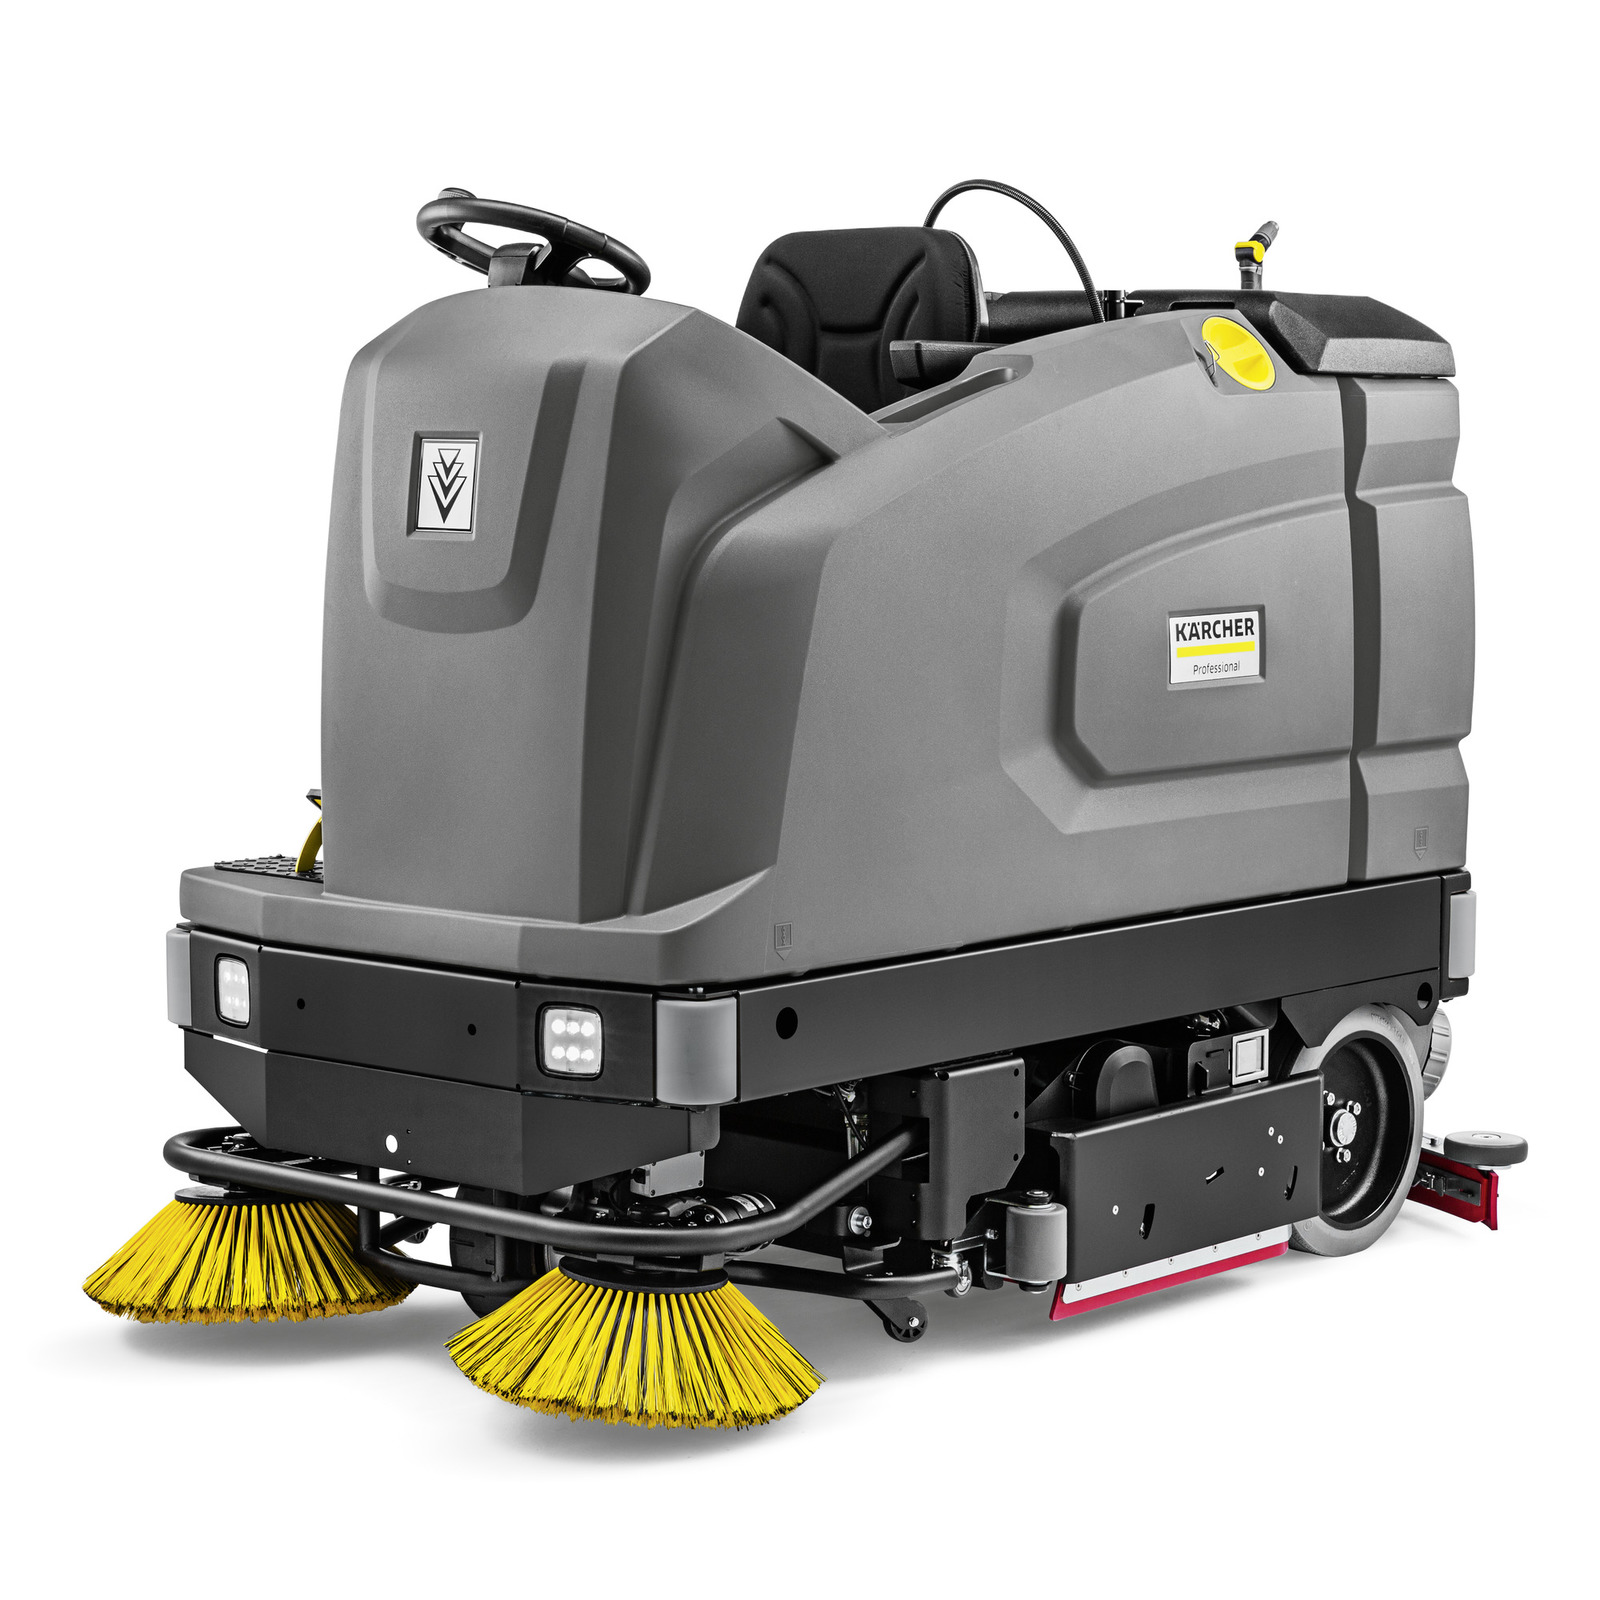 Karcher B 260 R I Bp karcher, b, 260, R, BP, Ride, ride-on, auto-scrubber, scrubber, scrub, floor, cleaning, large-area, facility, professional, commercial, industrial, janitorial, maintenance, 